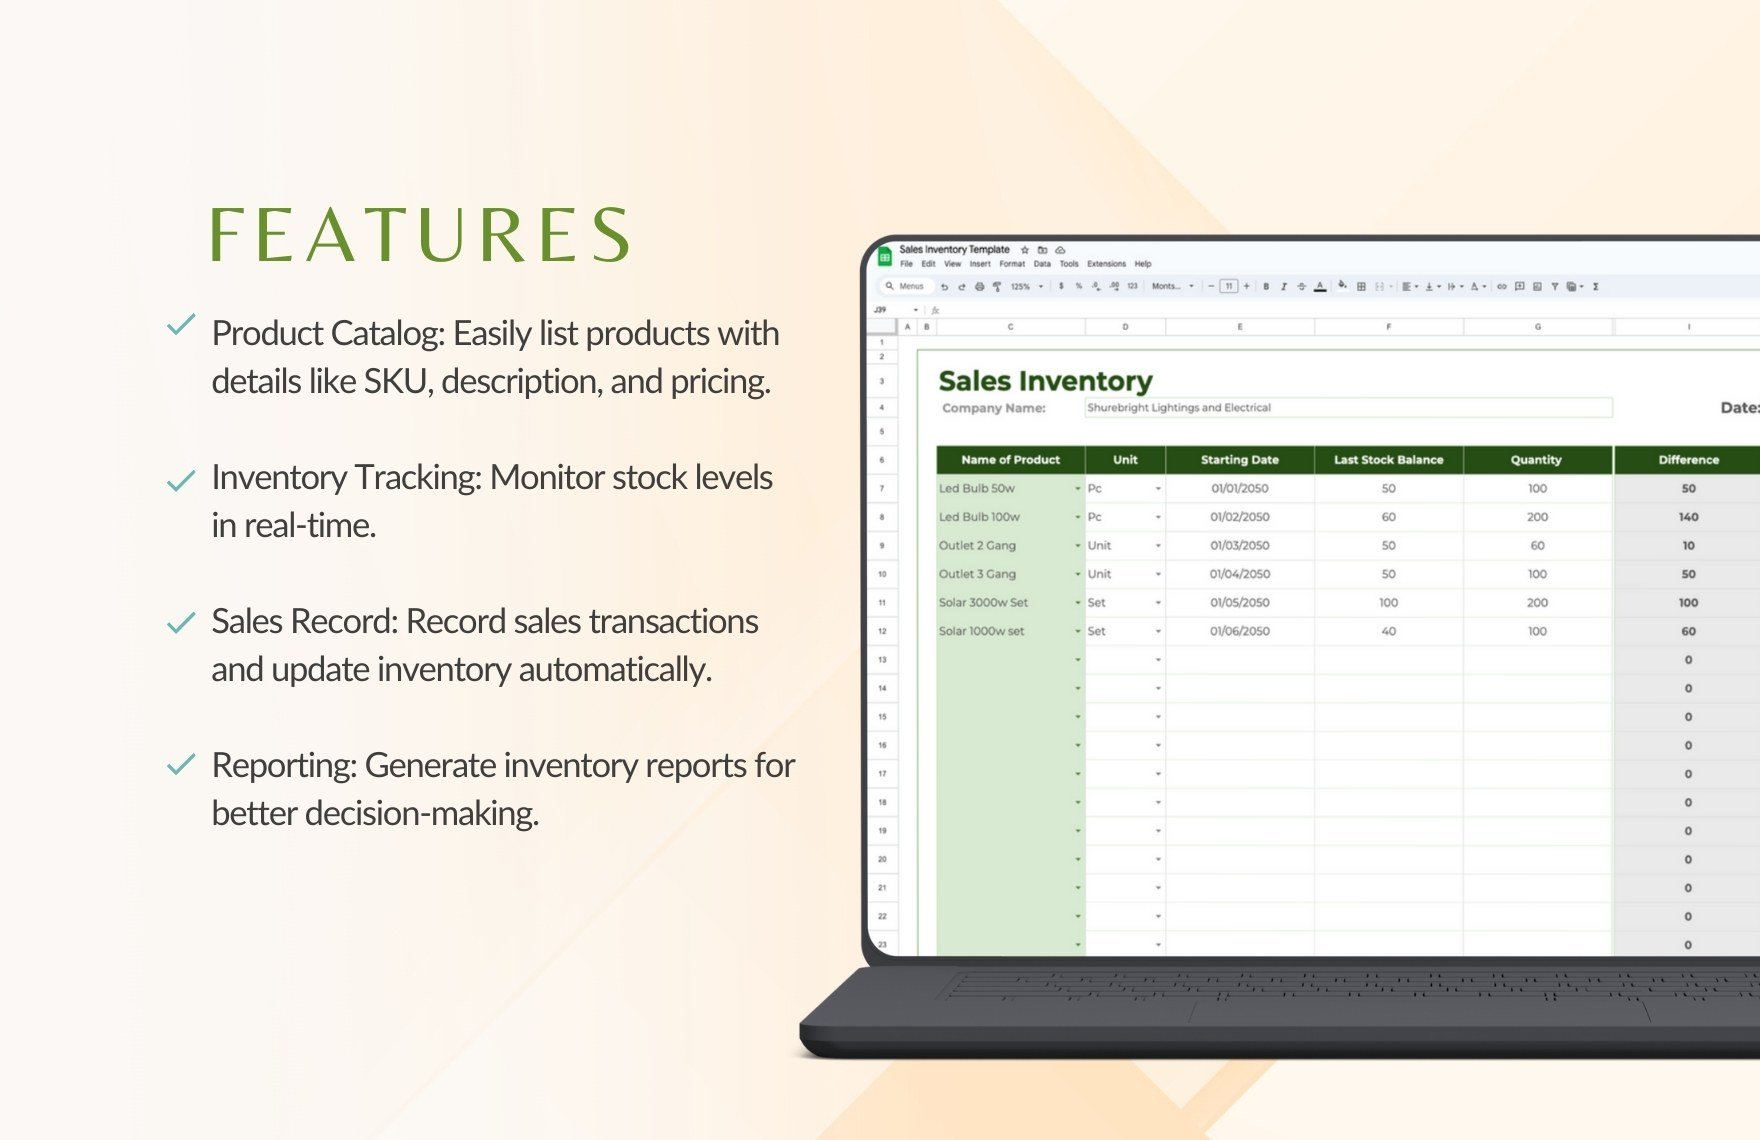 Sales Inventory Template